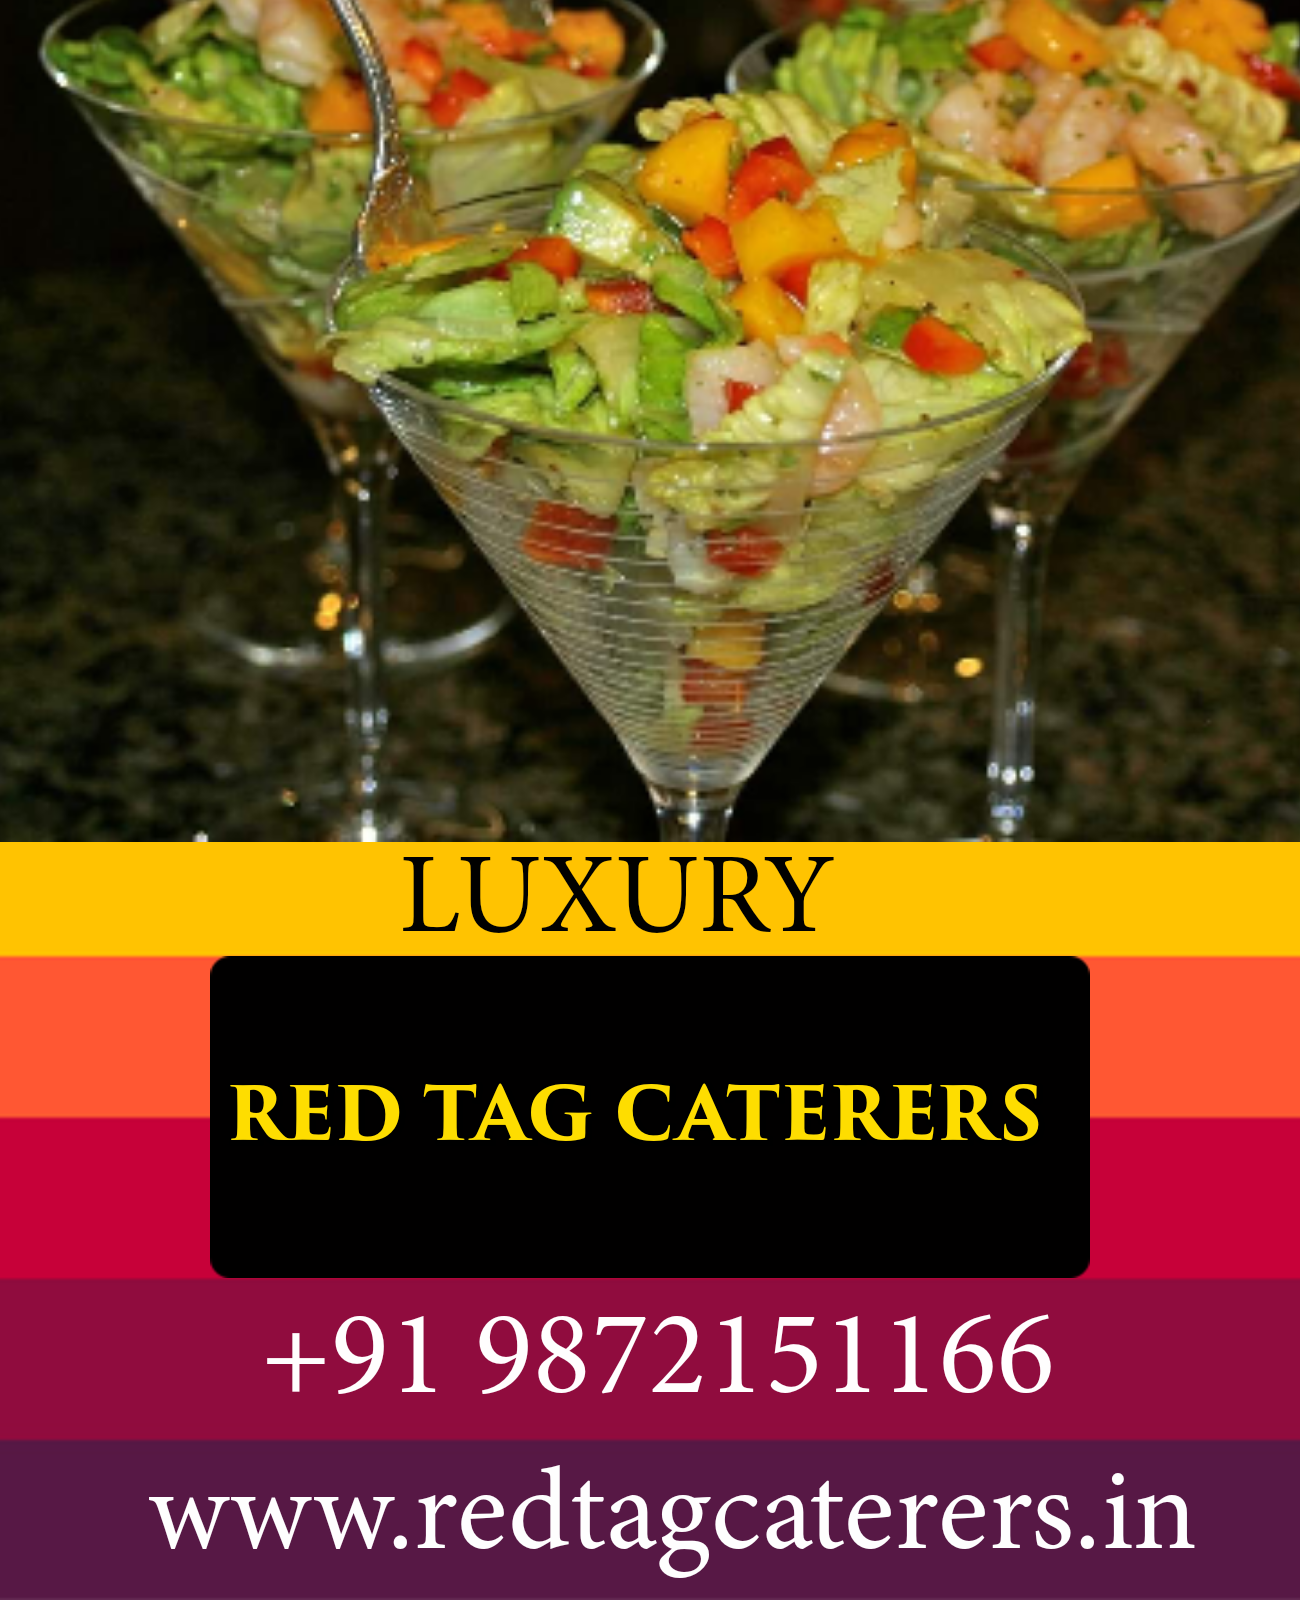 Best party catering company in Ludhiana  | Red Tag Caterers | Best party catering company in Ludhiana, best party catering company in Ludhiana, best party catering company in Ludhiana, best party catering company in Ludhiana, best party catering company in Ludhi - GL44406